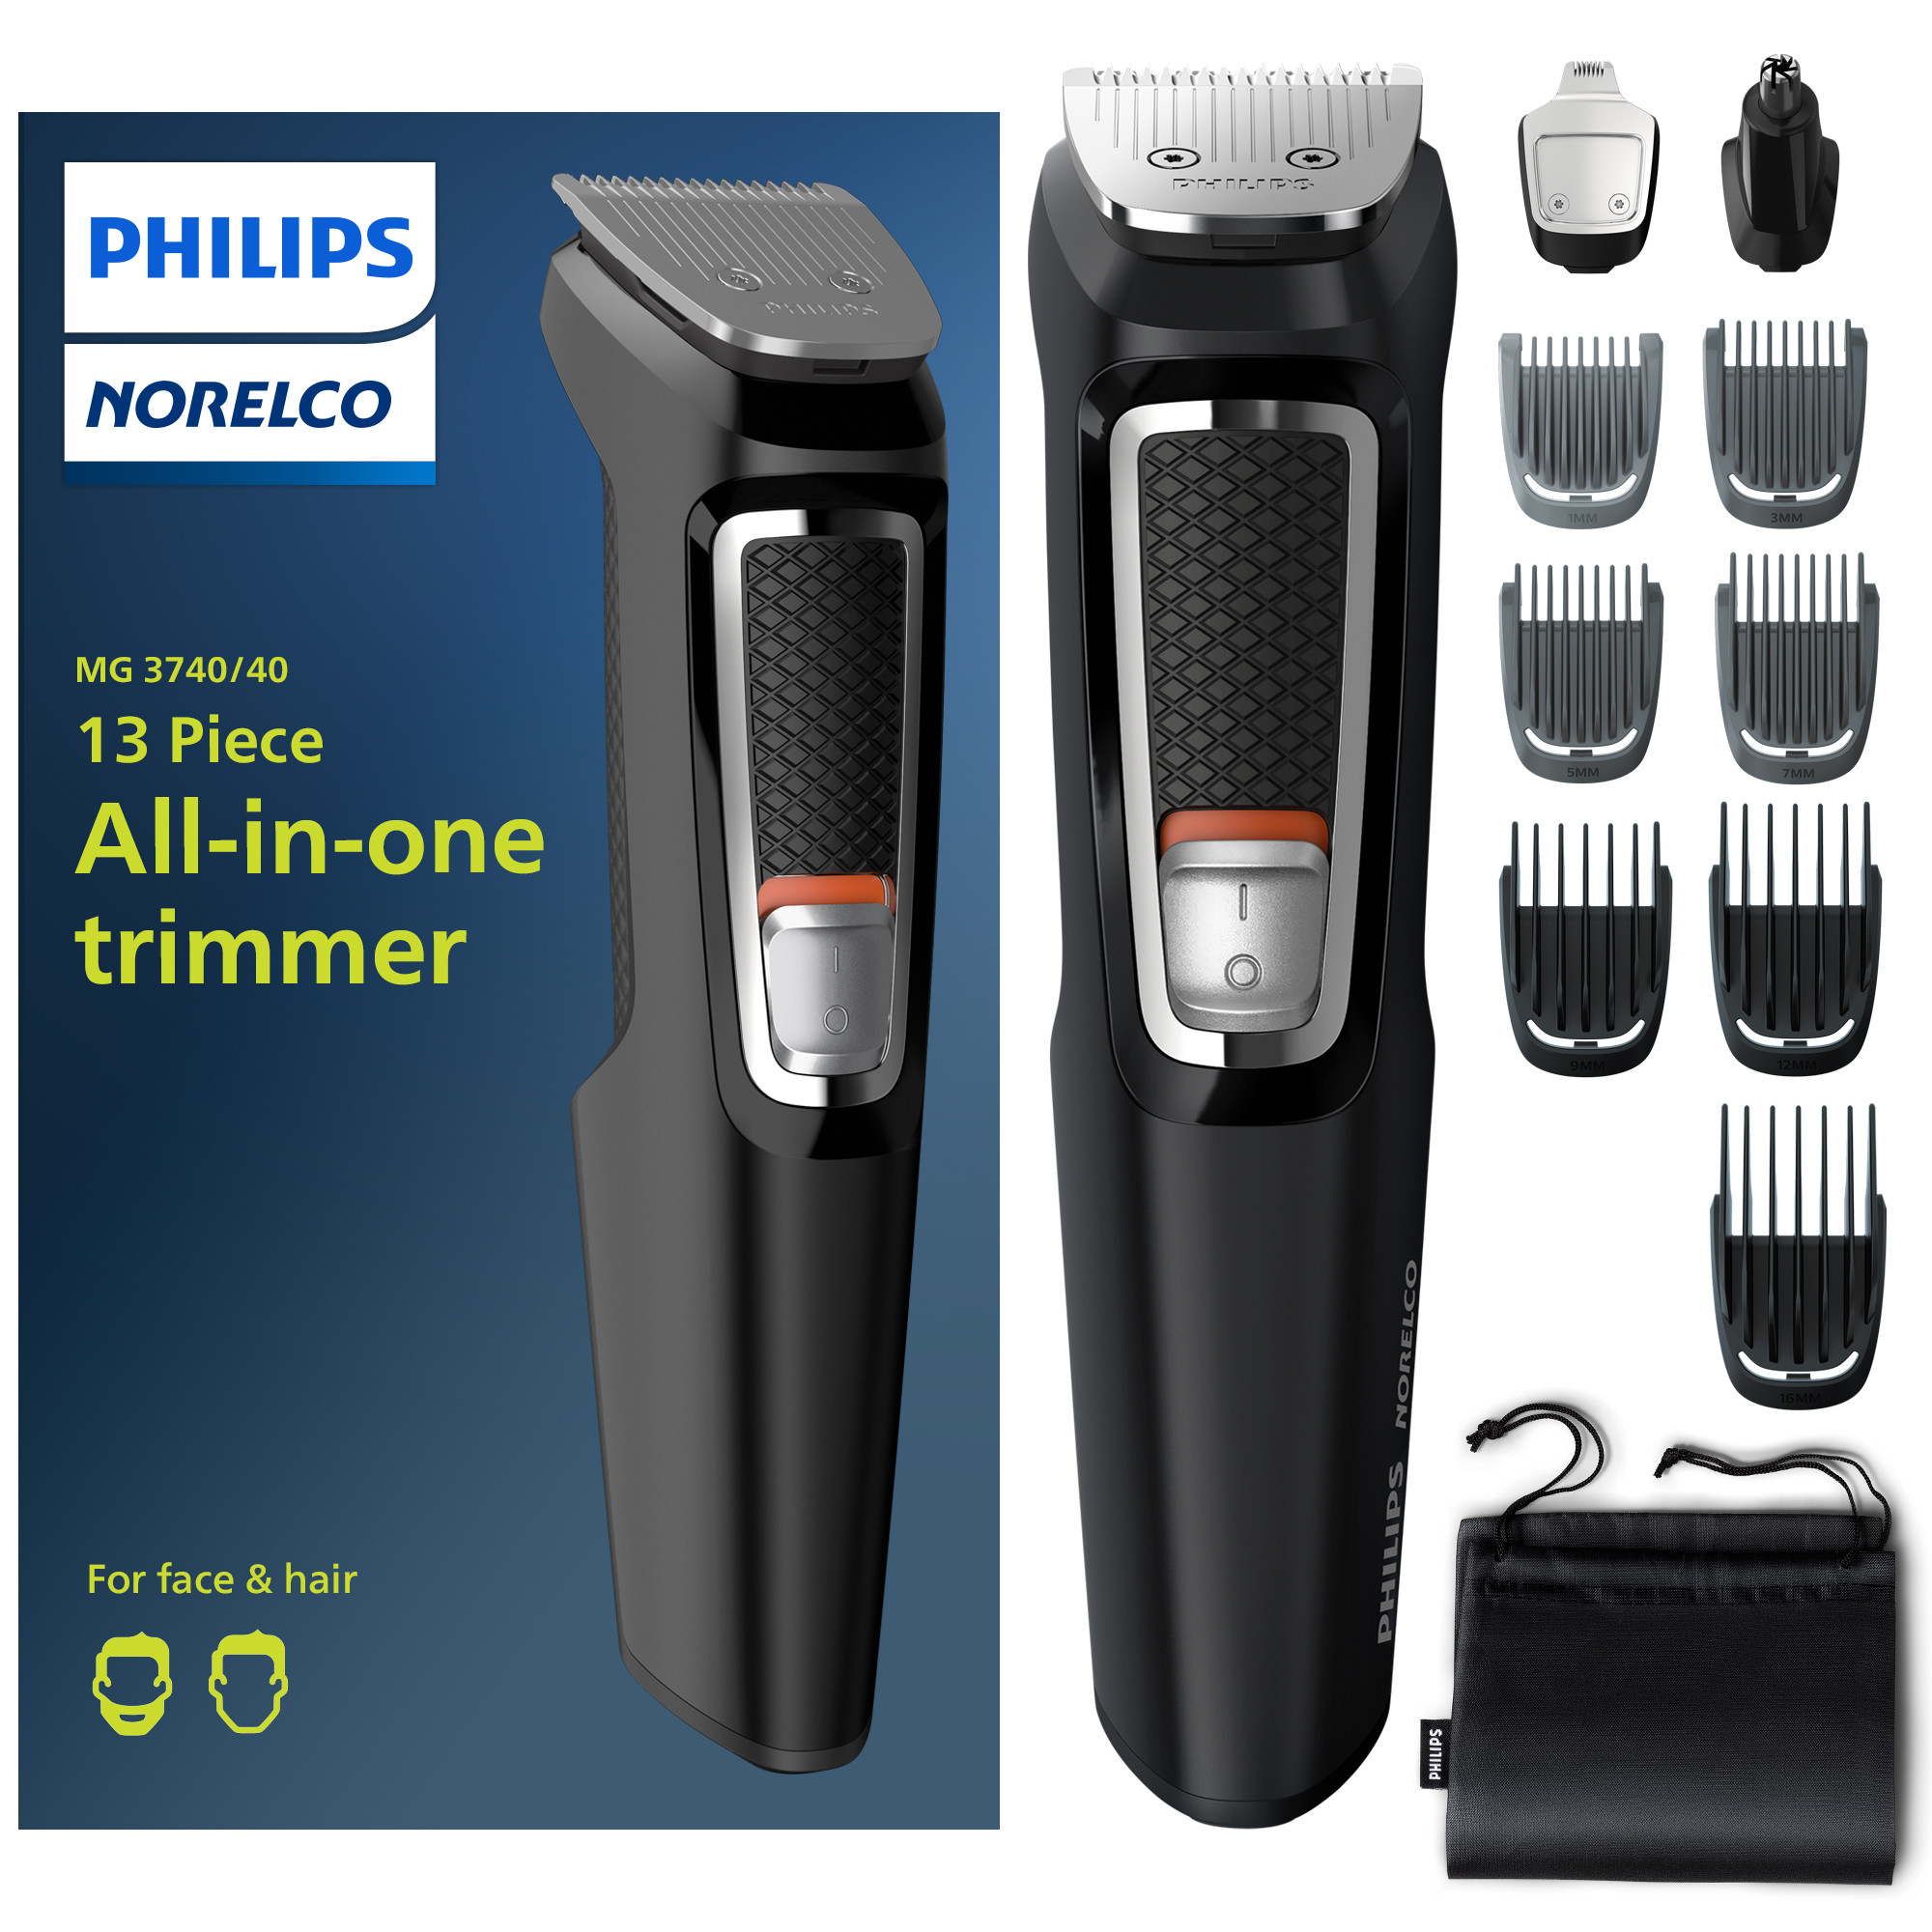 Philips Norelco Multi Groomer - 13 Piece Mens Grooming Kit For Beard, Face, Nose, and Ear Hair Trimmer and Hair Clipper - No Blade Oil Needed, MG3740/40 - image 1 of 16